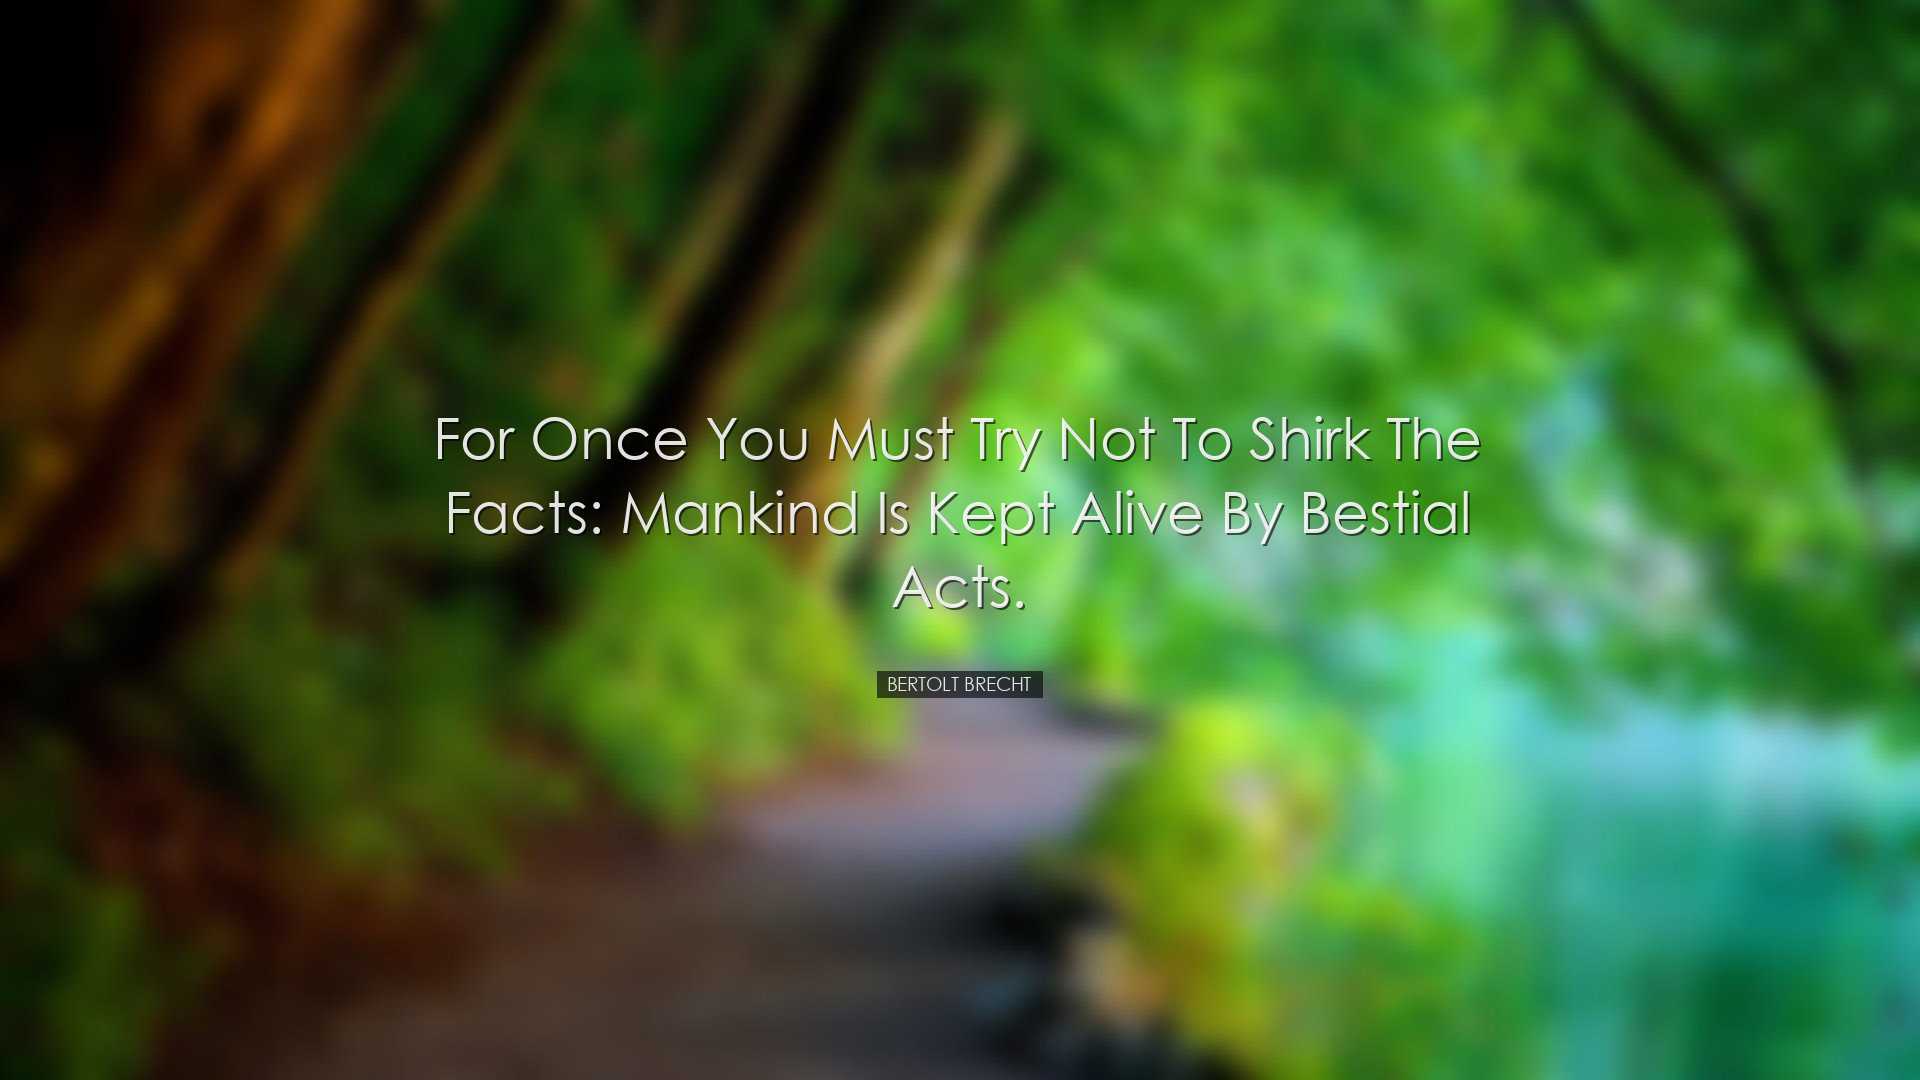 For once you must try not to shirk the facts: mankind is kept aliv